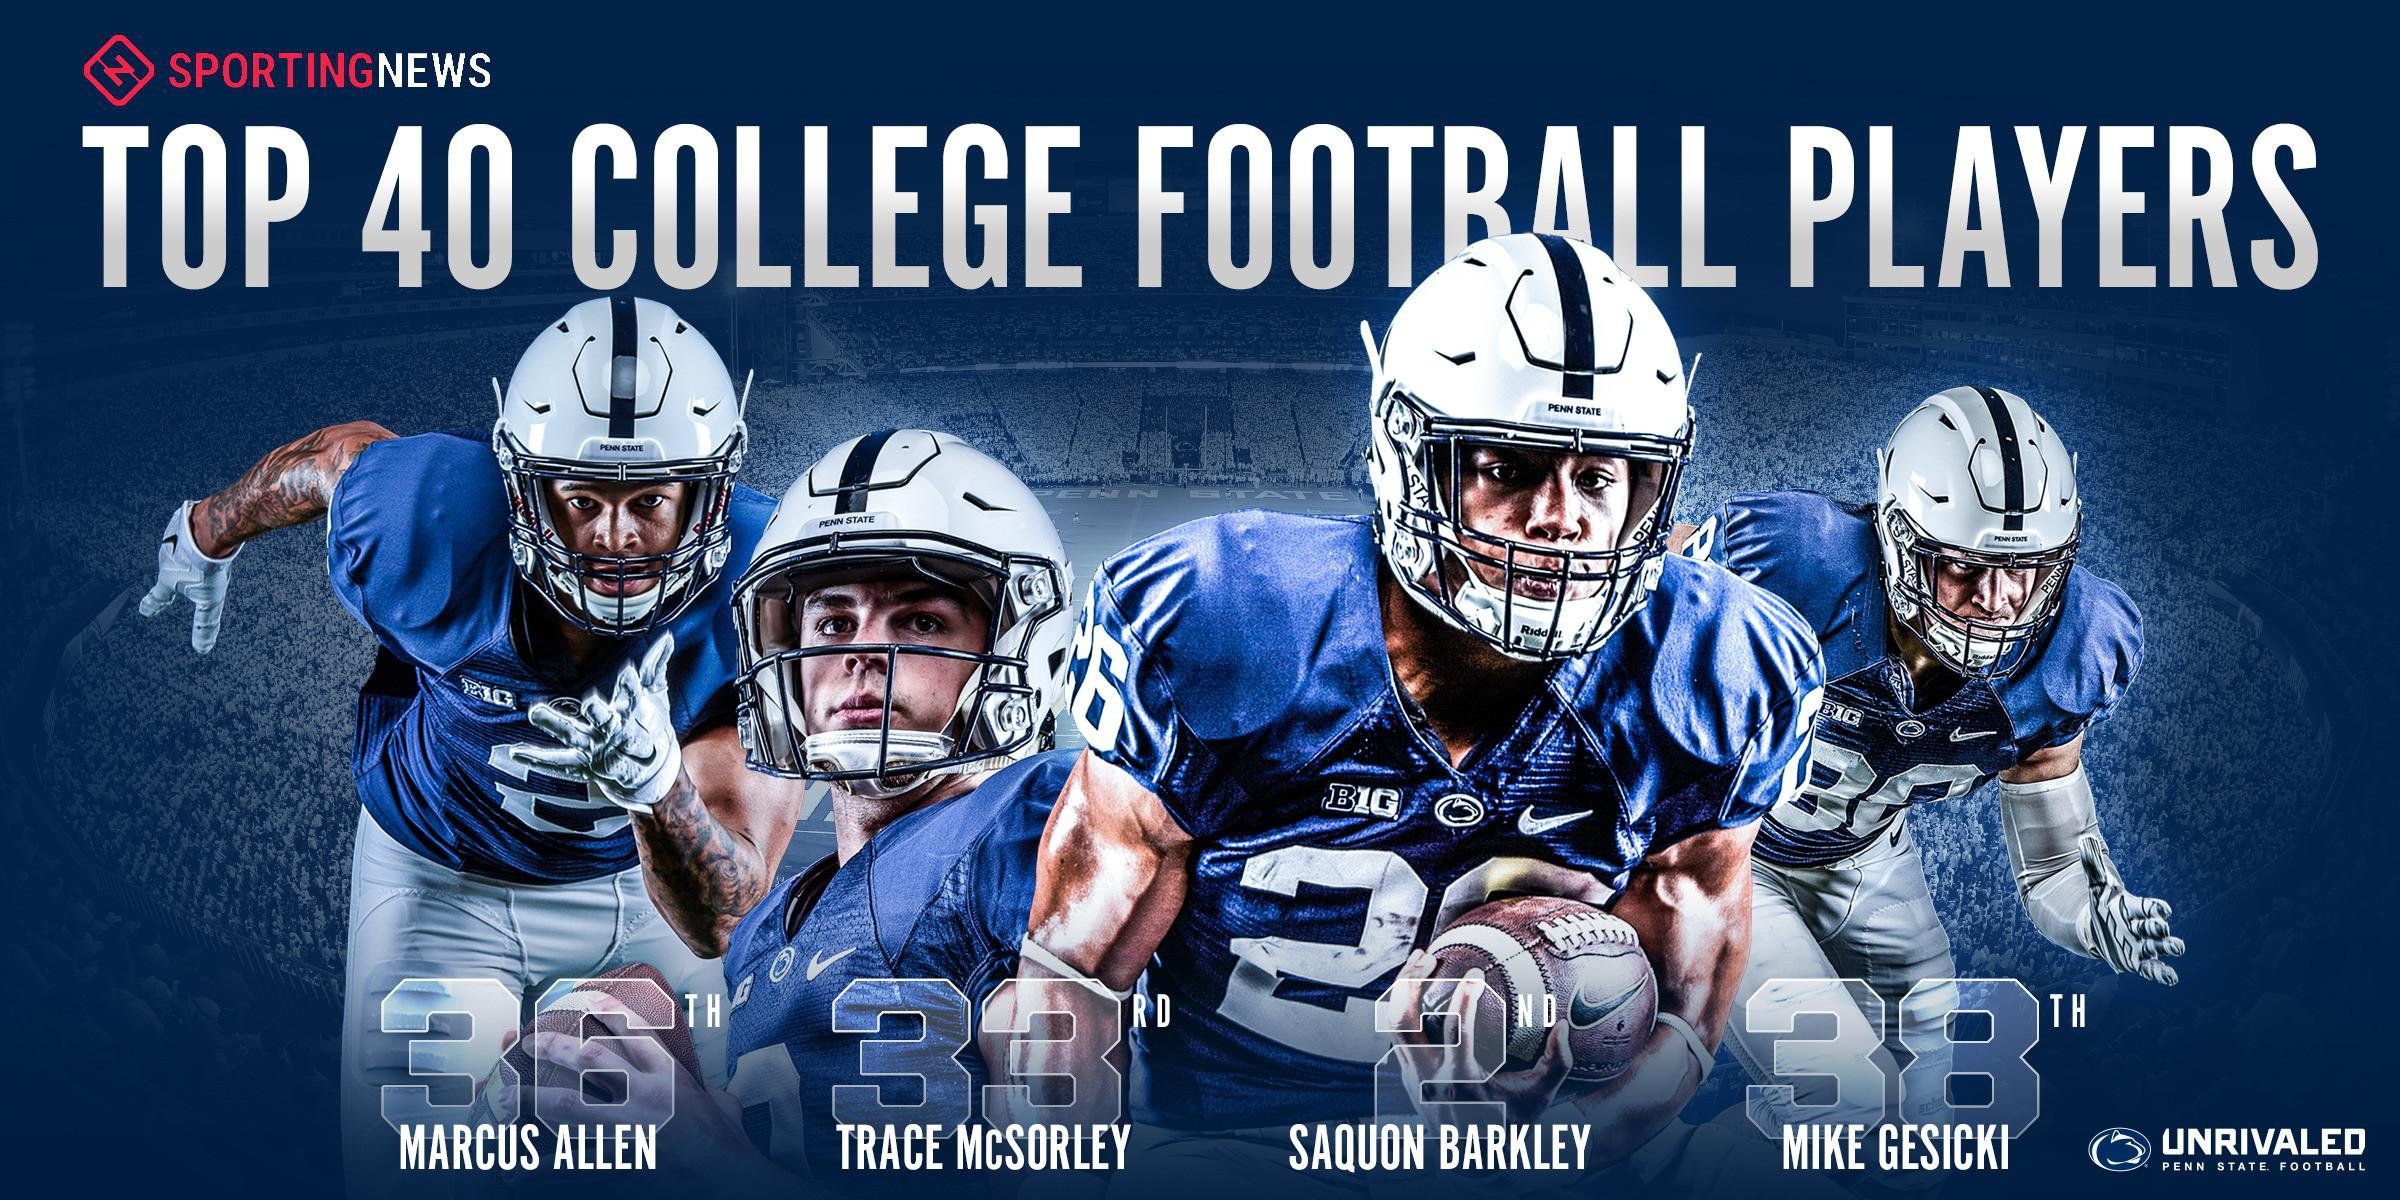 Free download Saquon Barkley no2 Top College Football Players